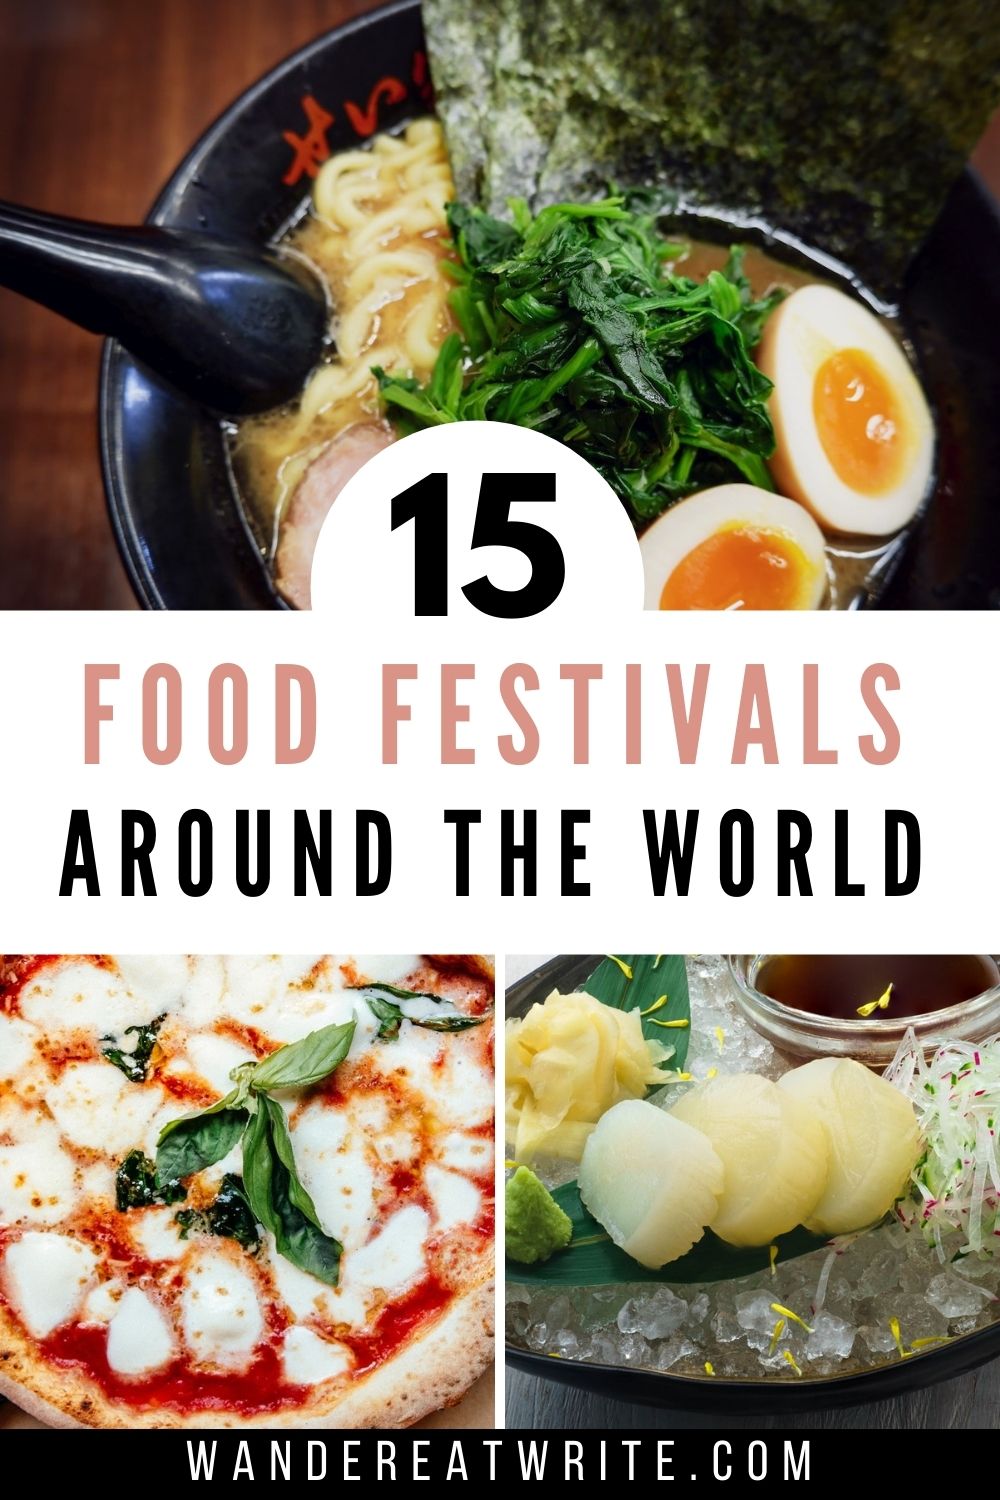 Text: 15 food festivals around the world; top photo: bowl of ramen with spinach, boiled egg, and seaweed; bottom left photo: pizza with tomato sauce, melted cheese, and basil; bottom right photo: scallop sashimi over ice next to wasabi, ginger, and soy sauce